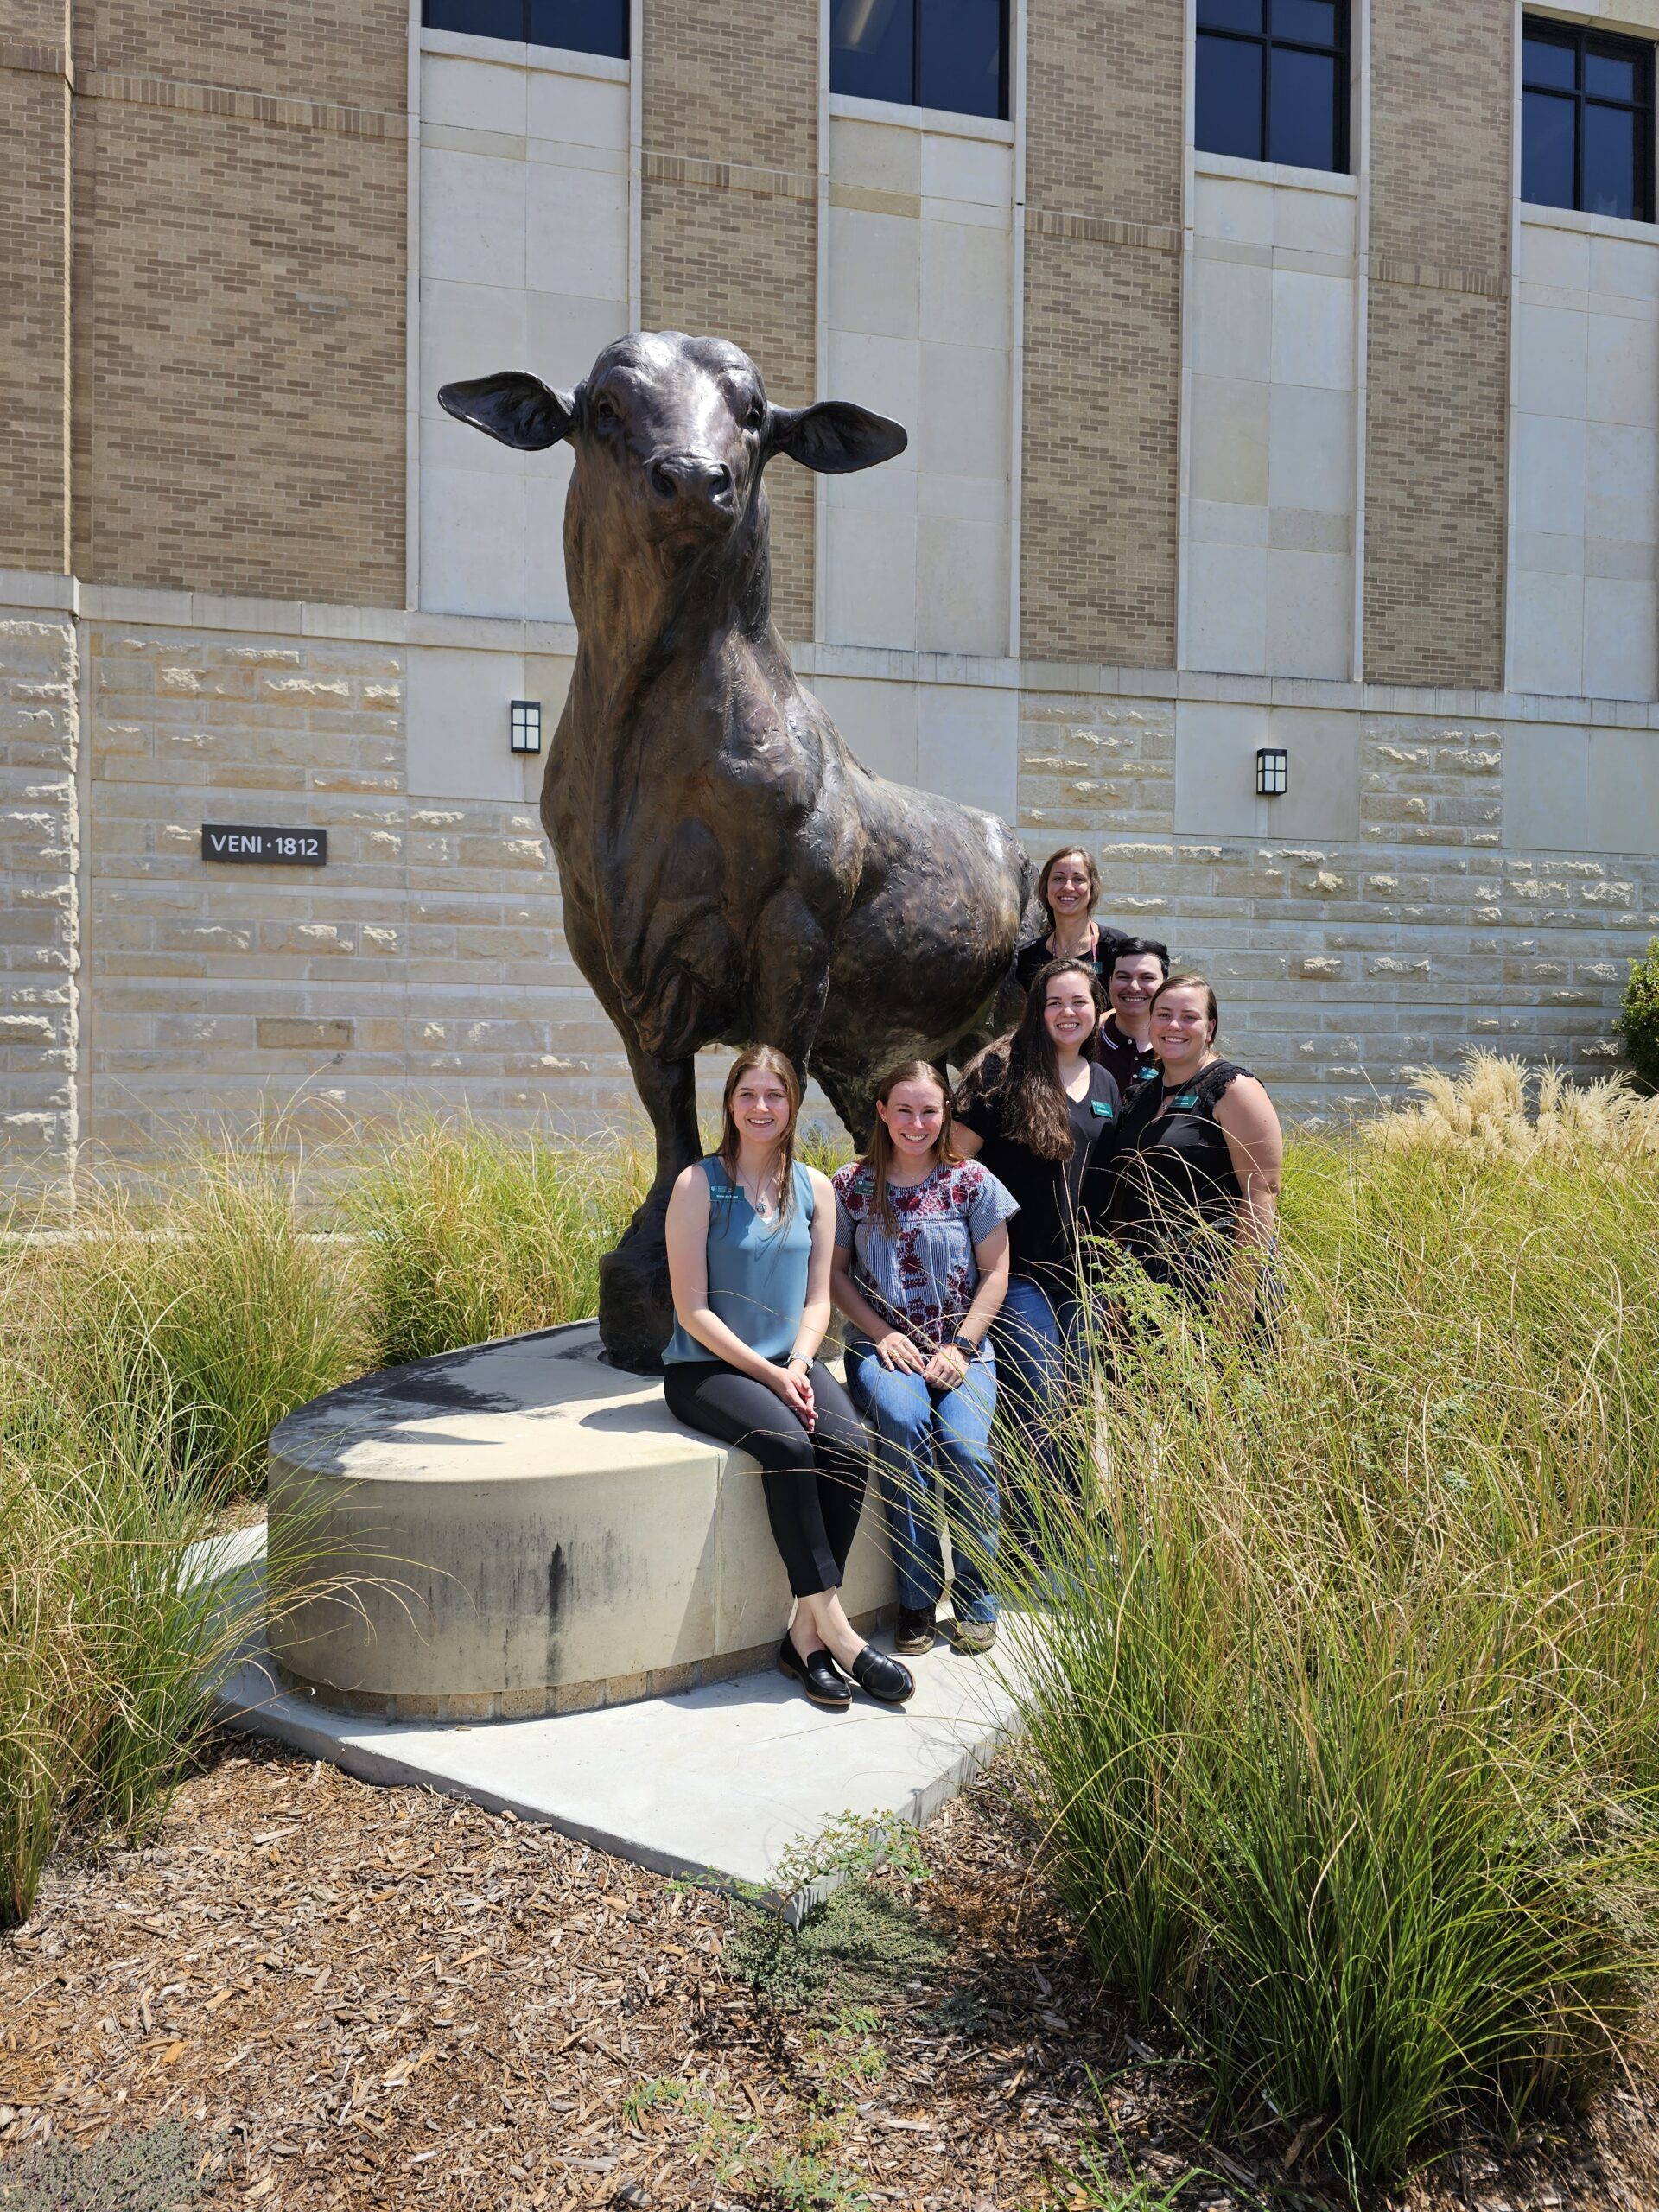 Five women and one man gathered around a large bronze sheep statue outdoors.